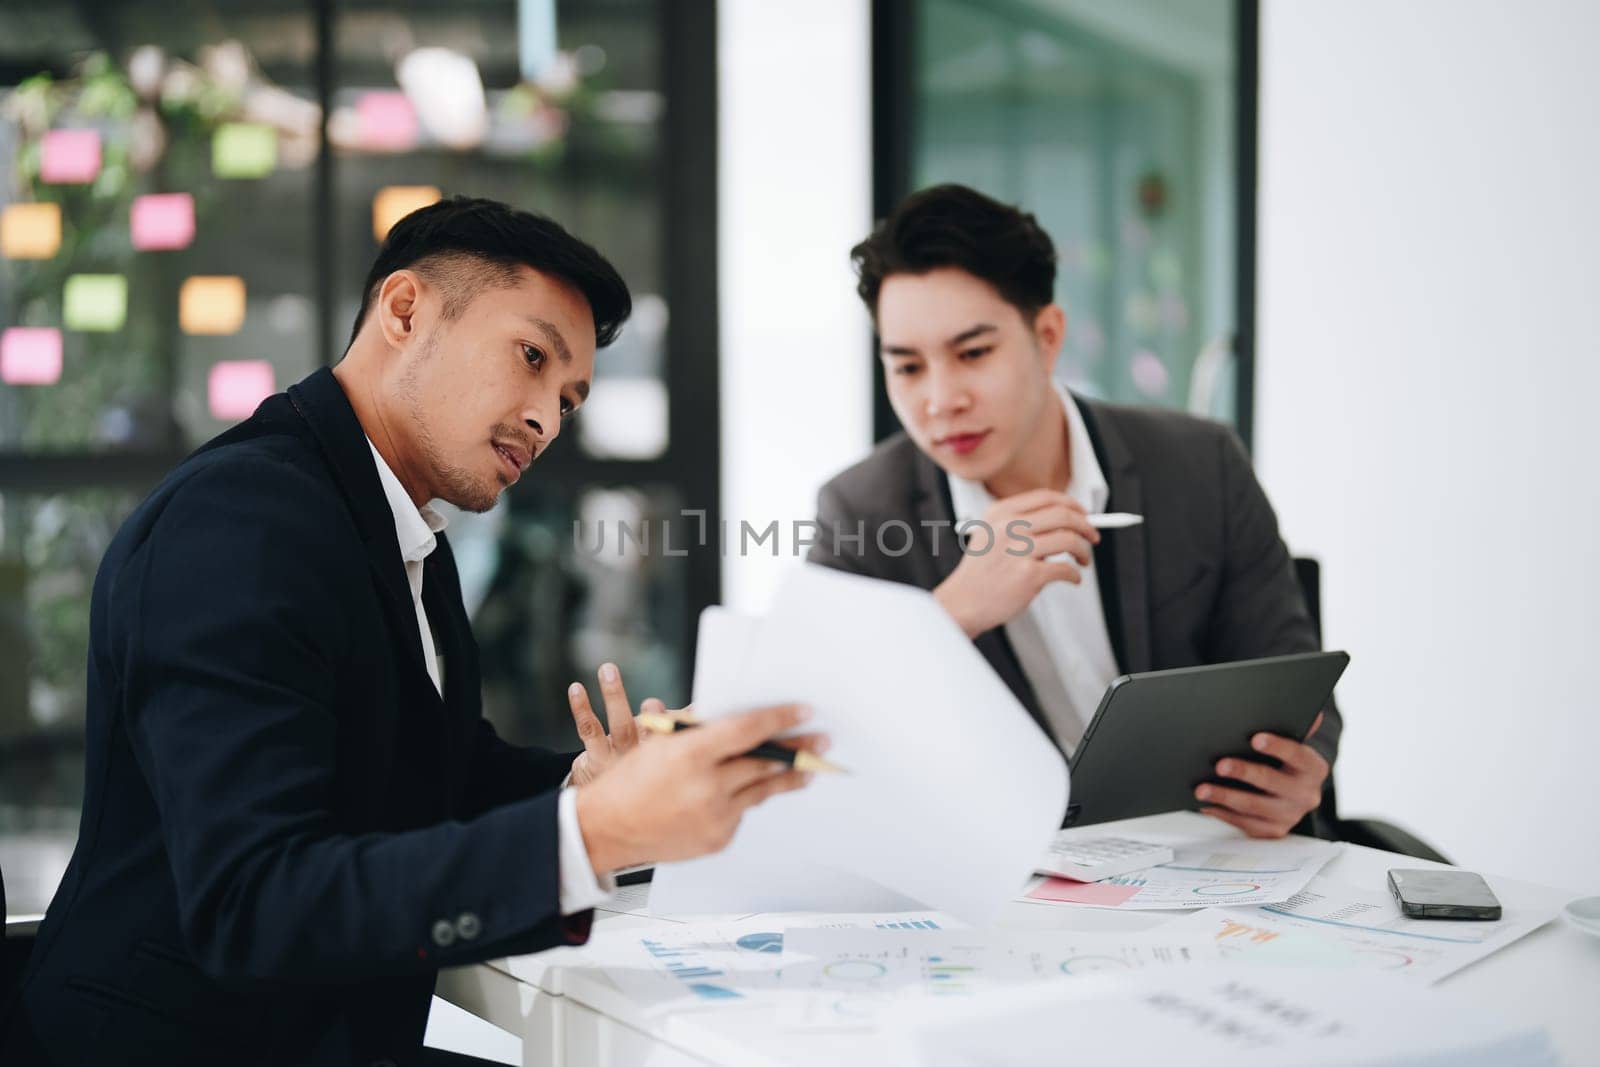 Two business men meeting to talking or discuss marketing work in workplace using paperwork, calculator, computer to work